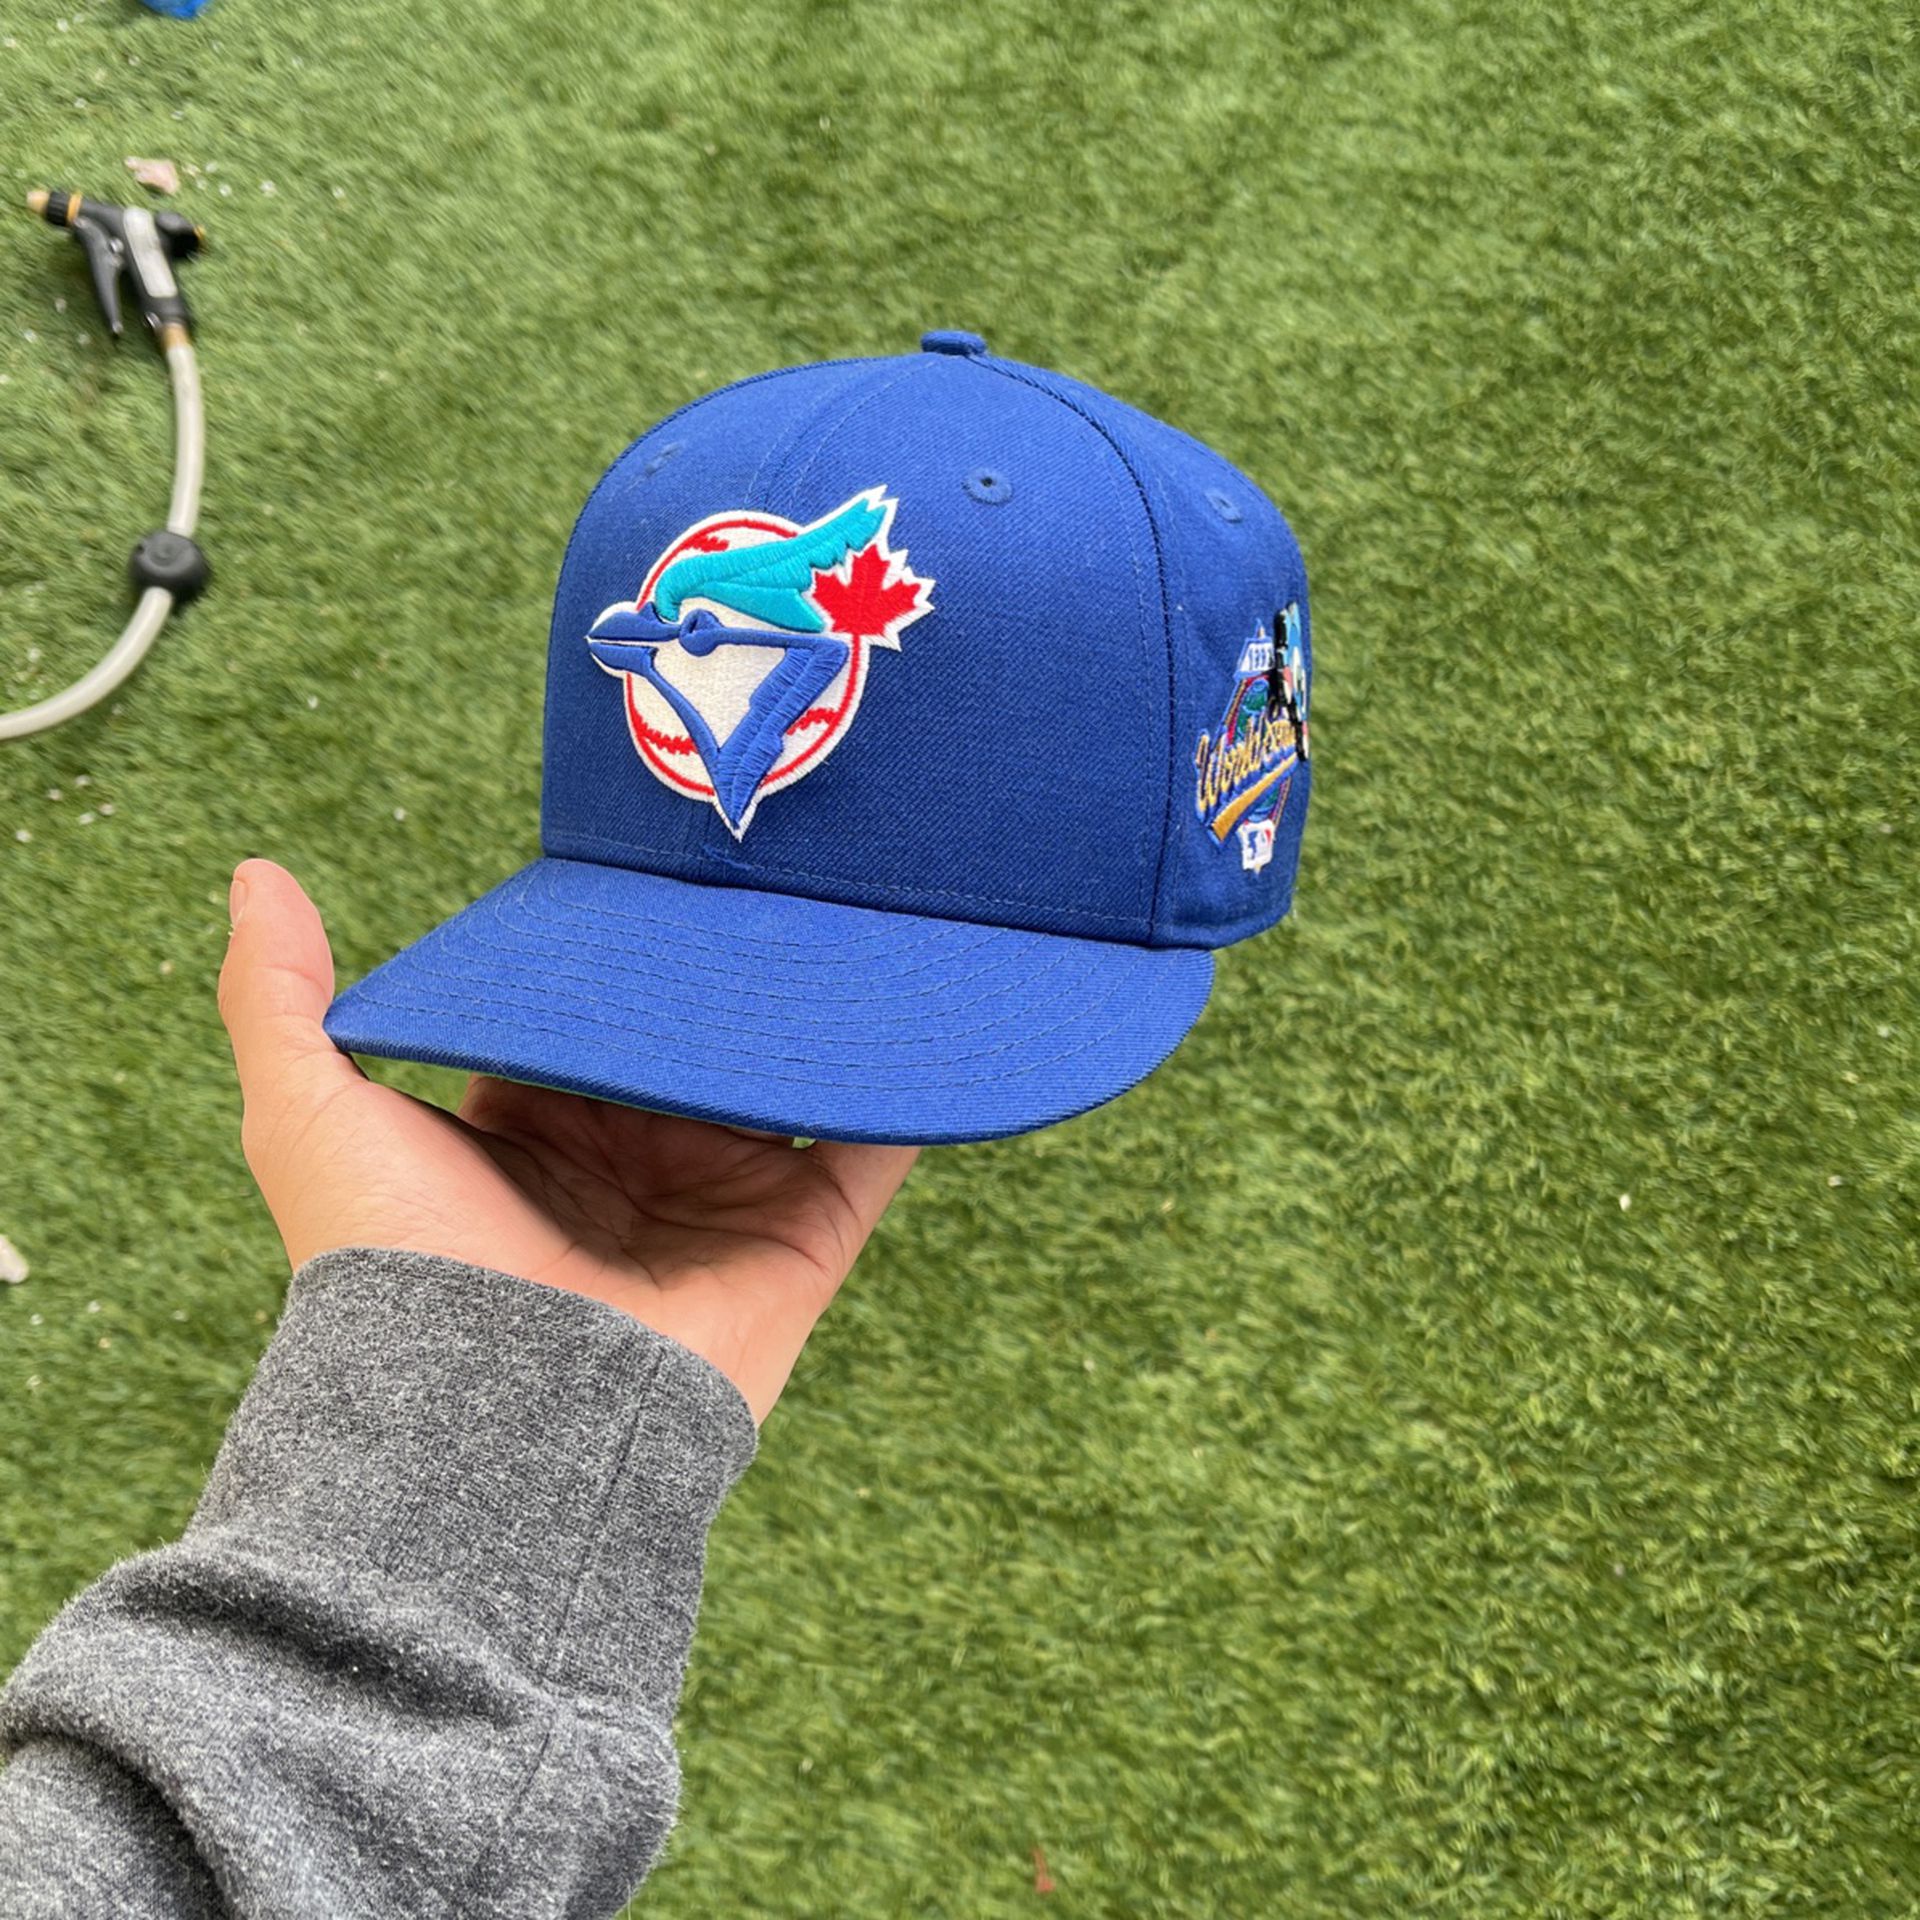 Blue Jays Fitted Hat for Sale in El Monte, CA - OfferUp